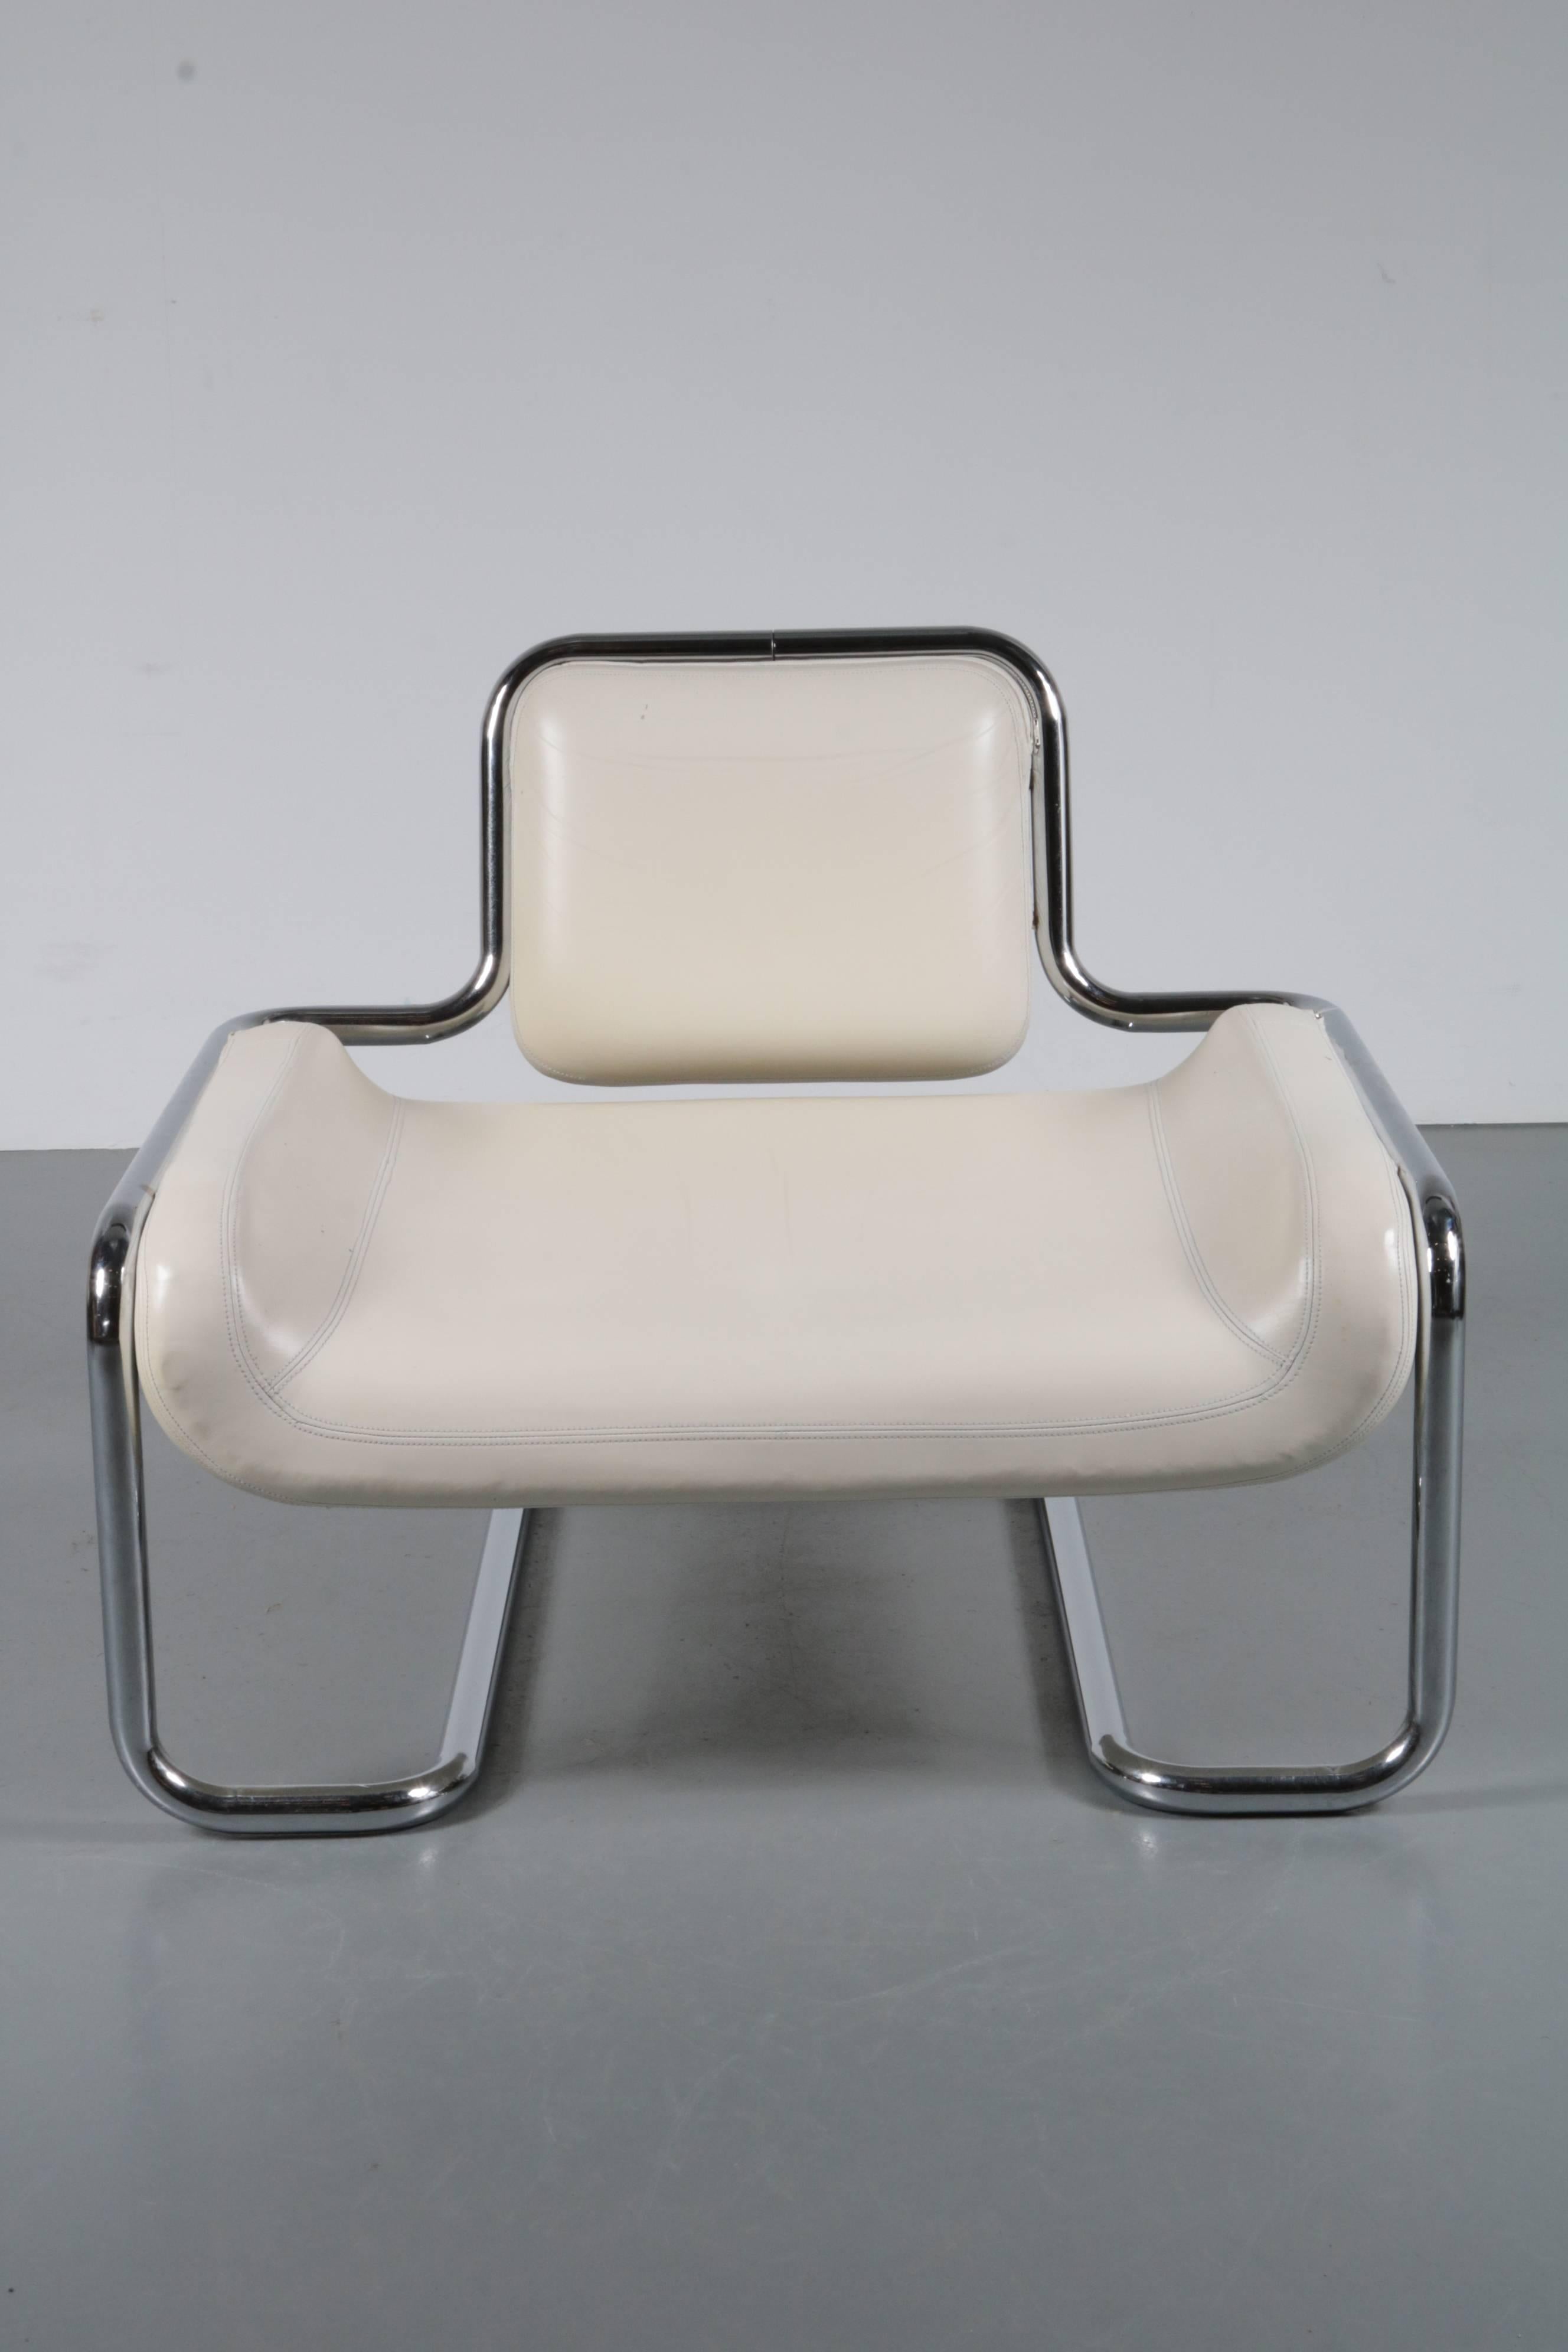 French Pair of Limande Chairs by Kwok Hoï Chan for Steiner in France, 1971